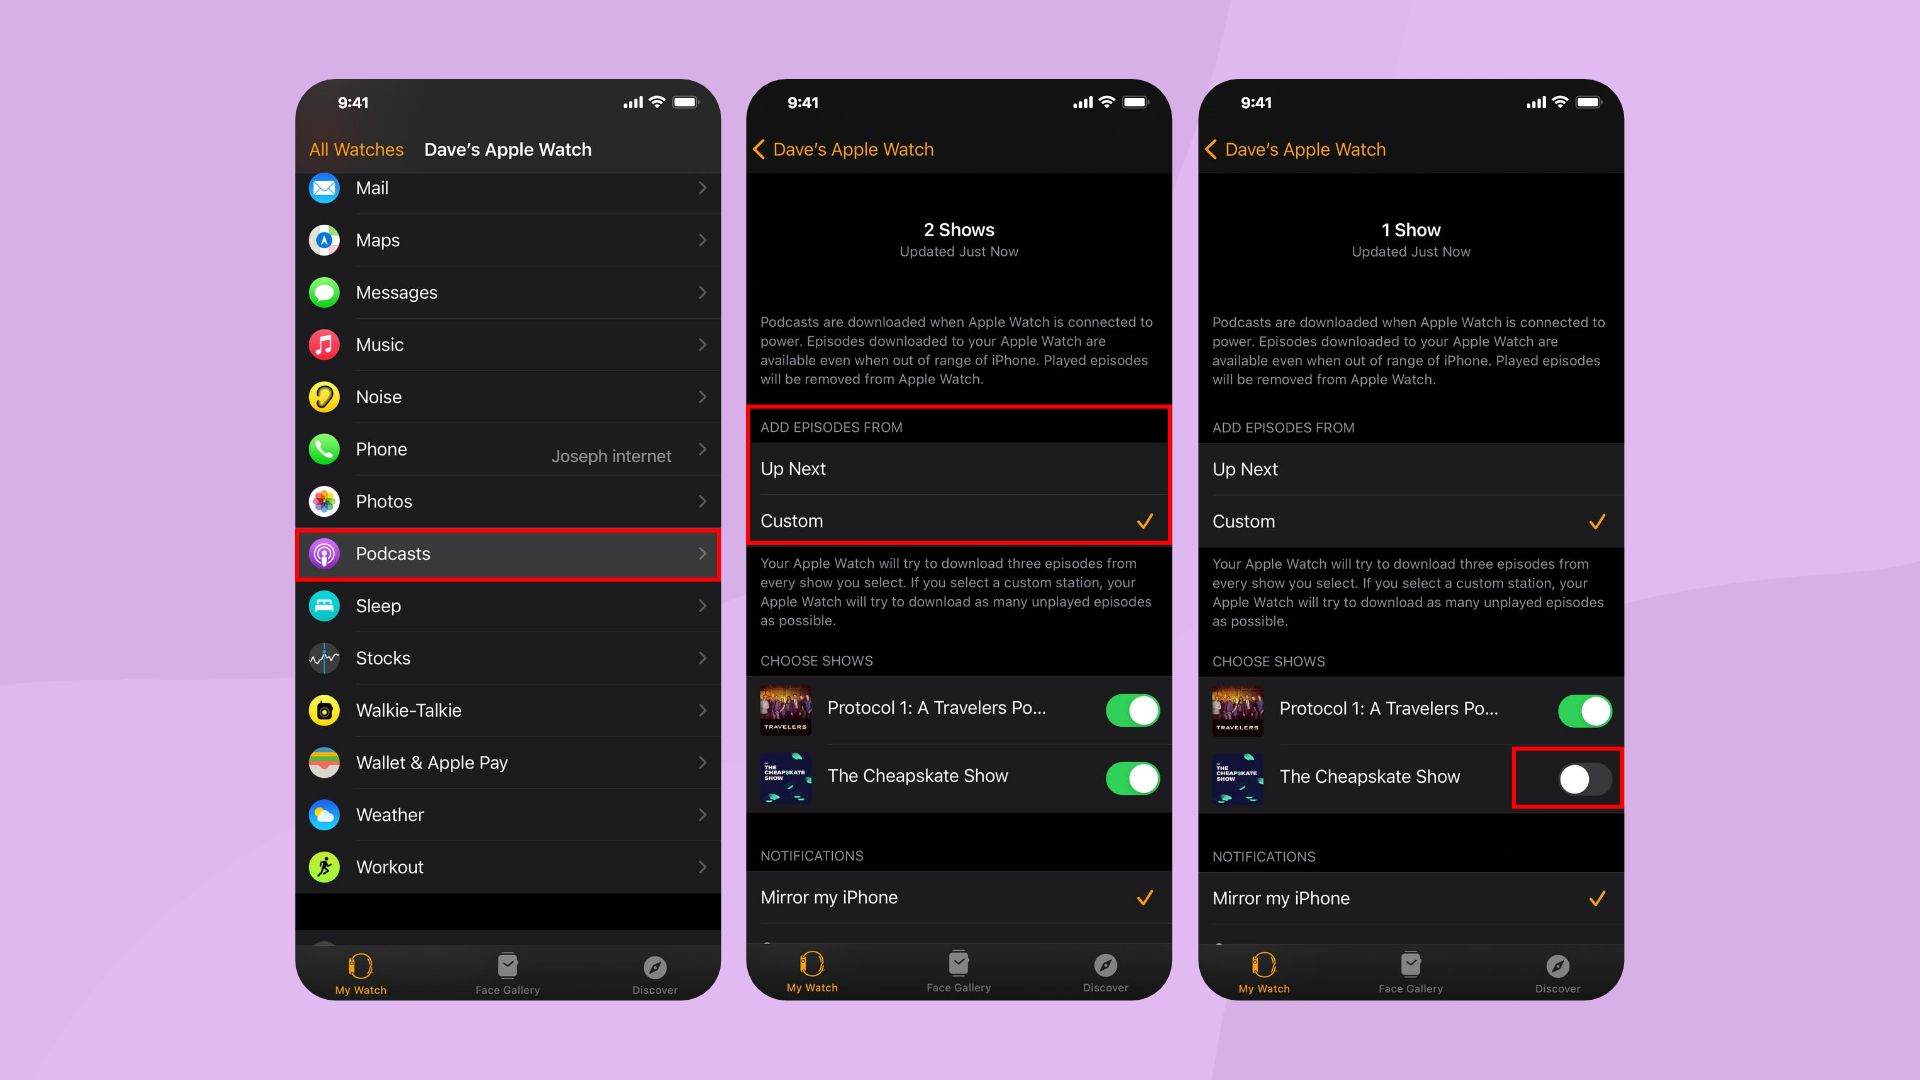 steps on how to delete podcasts stored on an Apple Watch